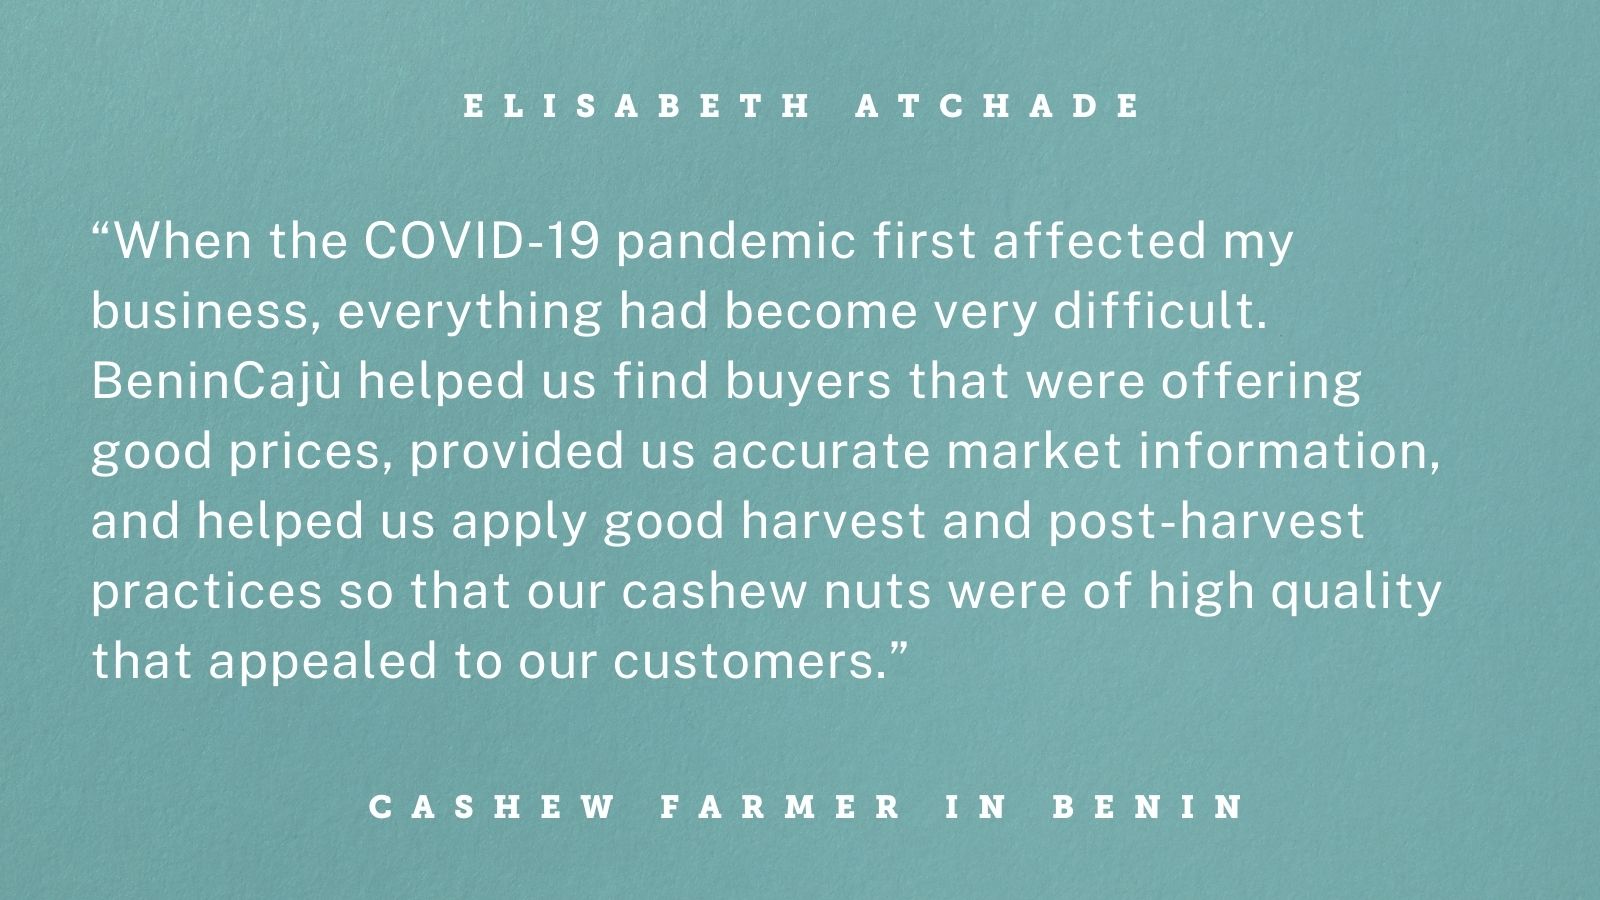 Quote graphic with white text on teal background. Text reads “When the COVID-19 pandemic first affected my business, everything had become very difficult. BeninCajù helped us find buyers that were offering good prices, provided us accurate market information, and helped us apply good harvest and post-harvest practices so that our cashew nuts were of high quality that appealed to our customers.”  